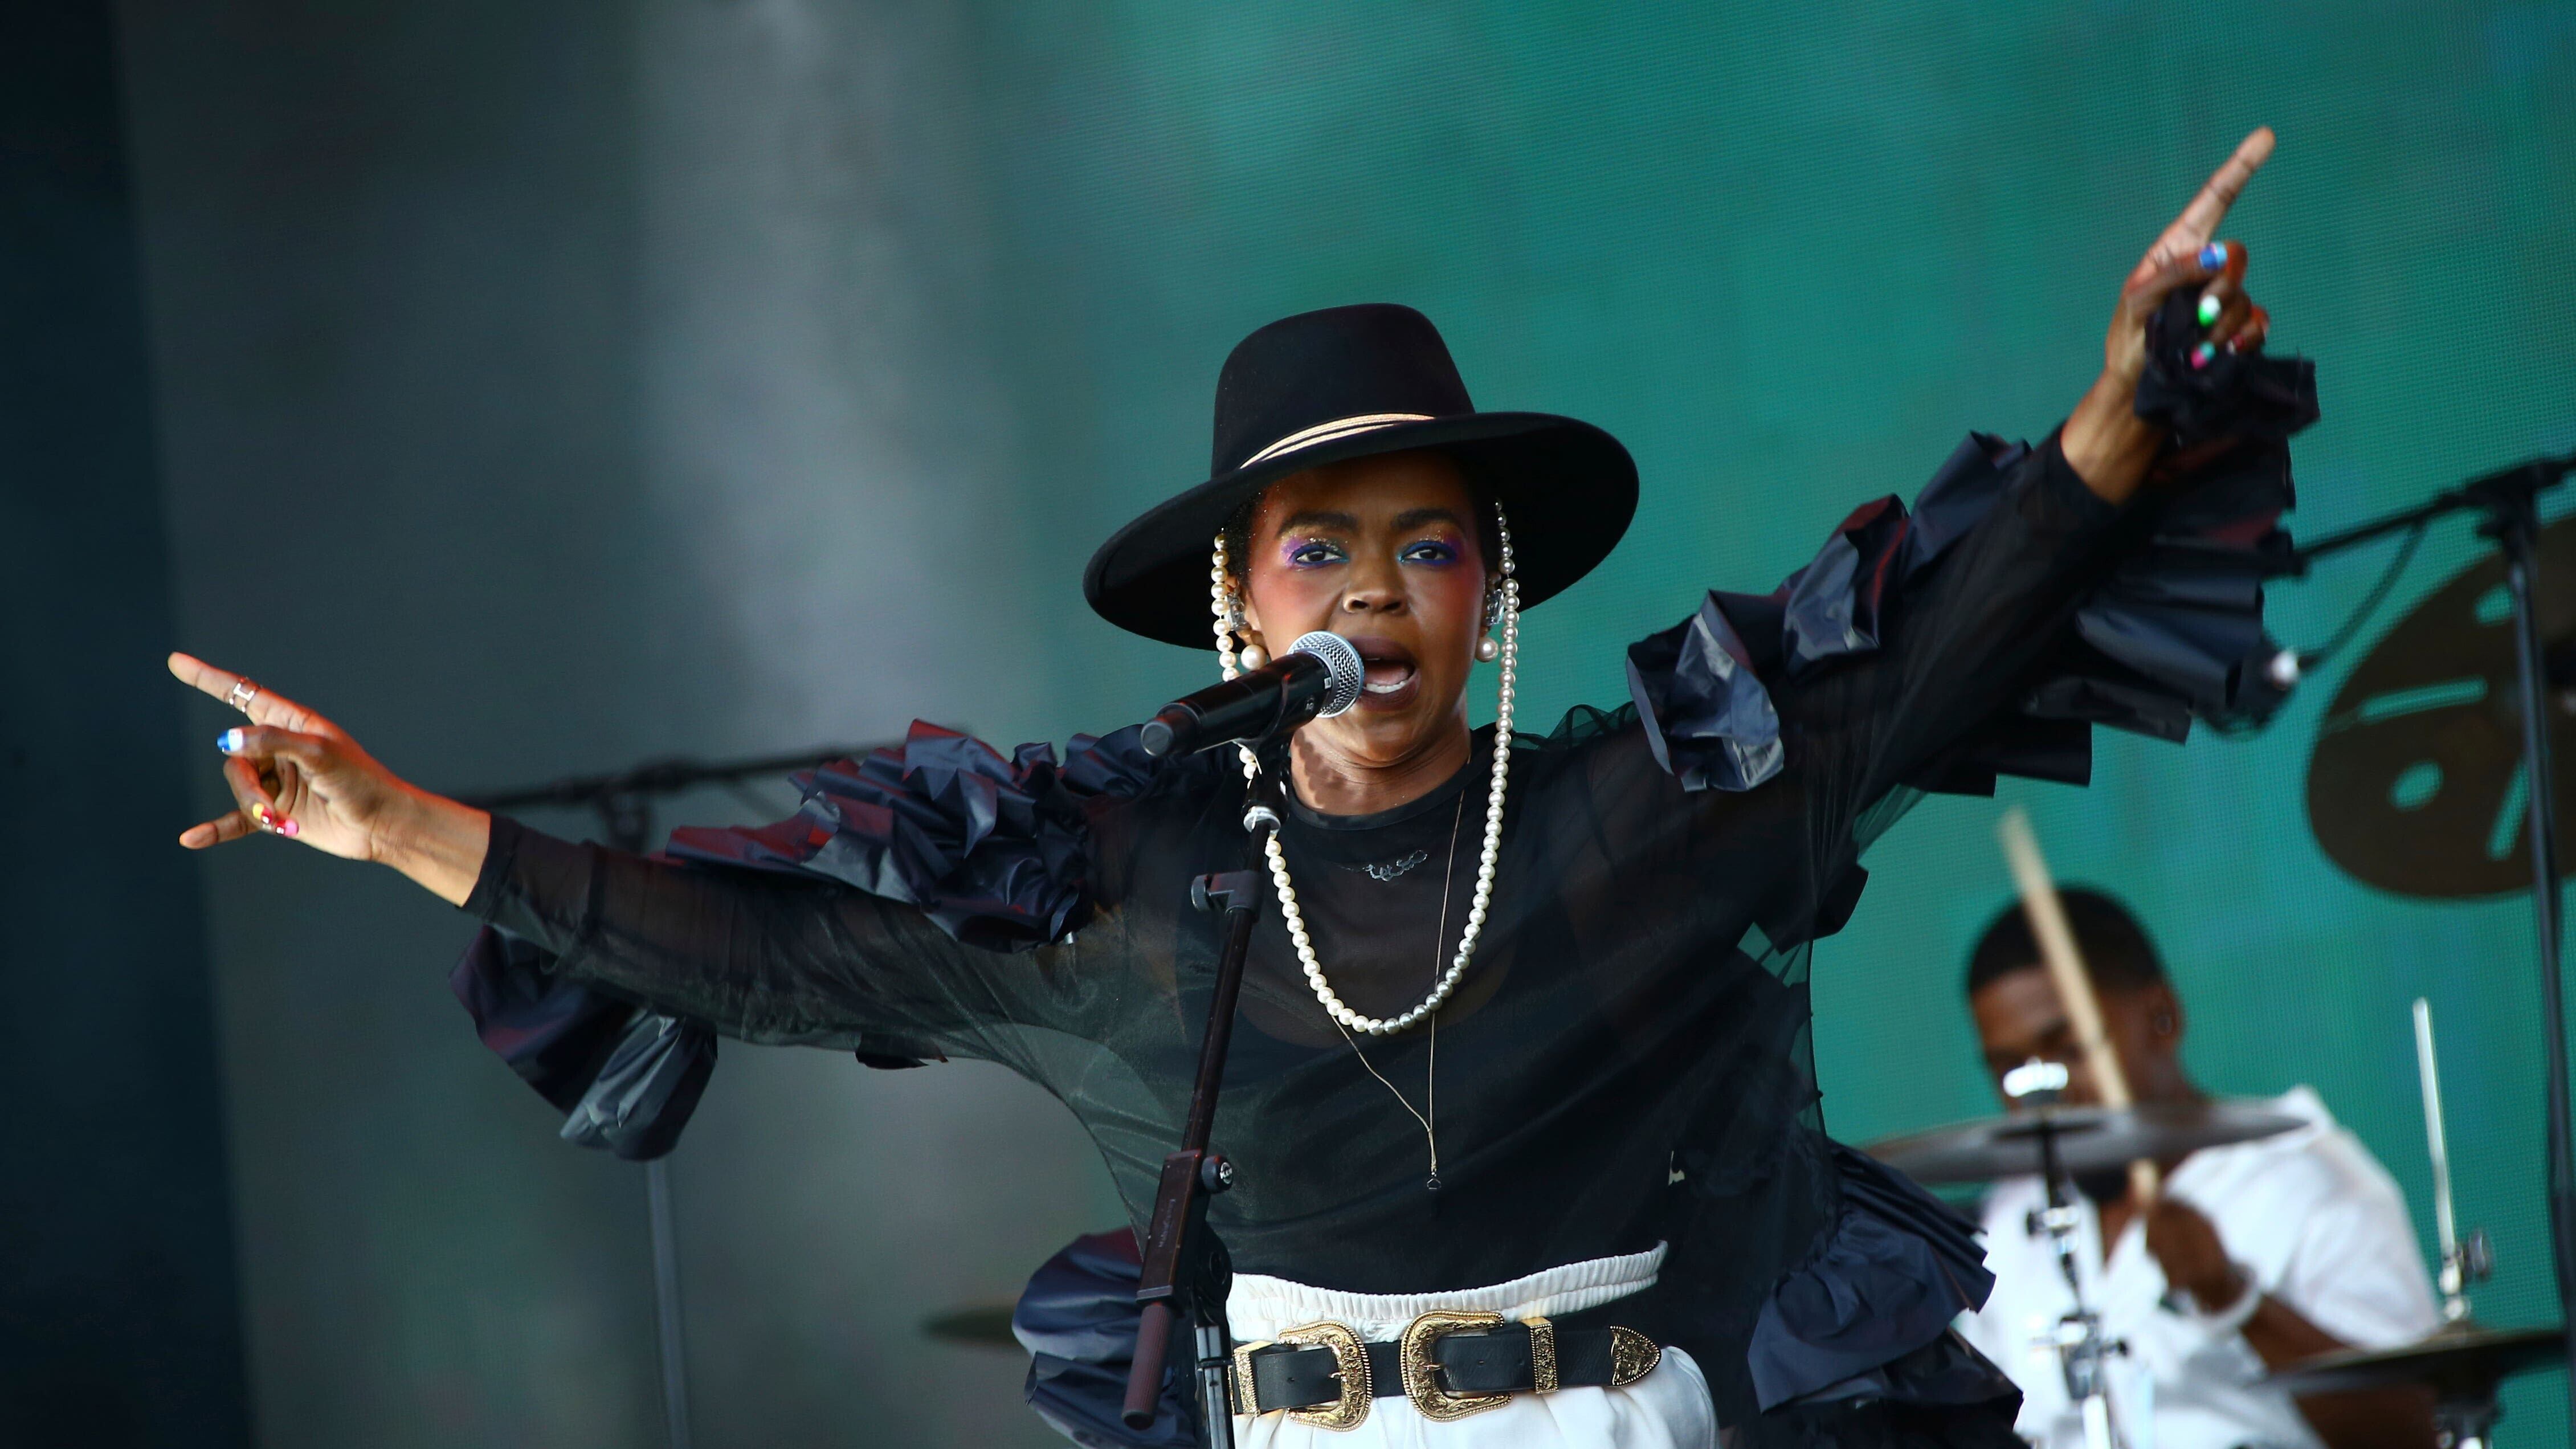 The four-day event in New Orleans will celebrate hip-hop music and black culture.